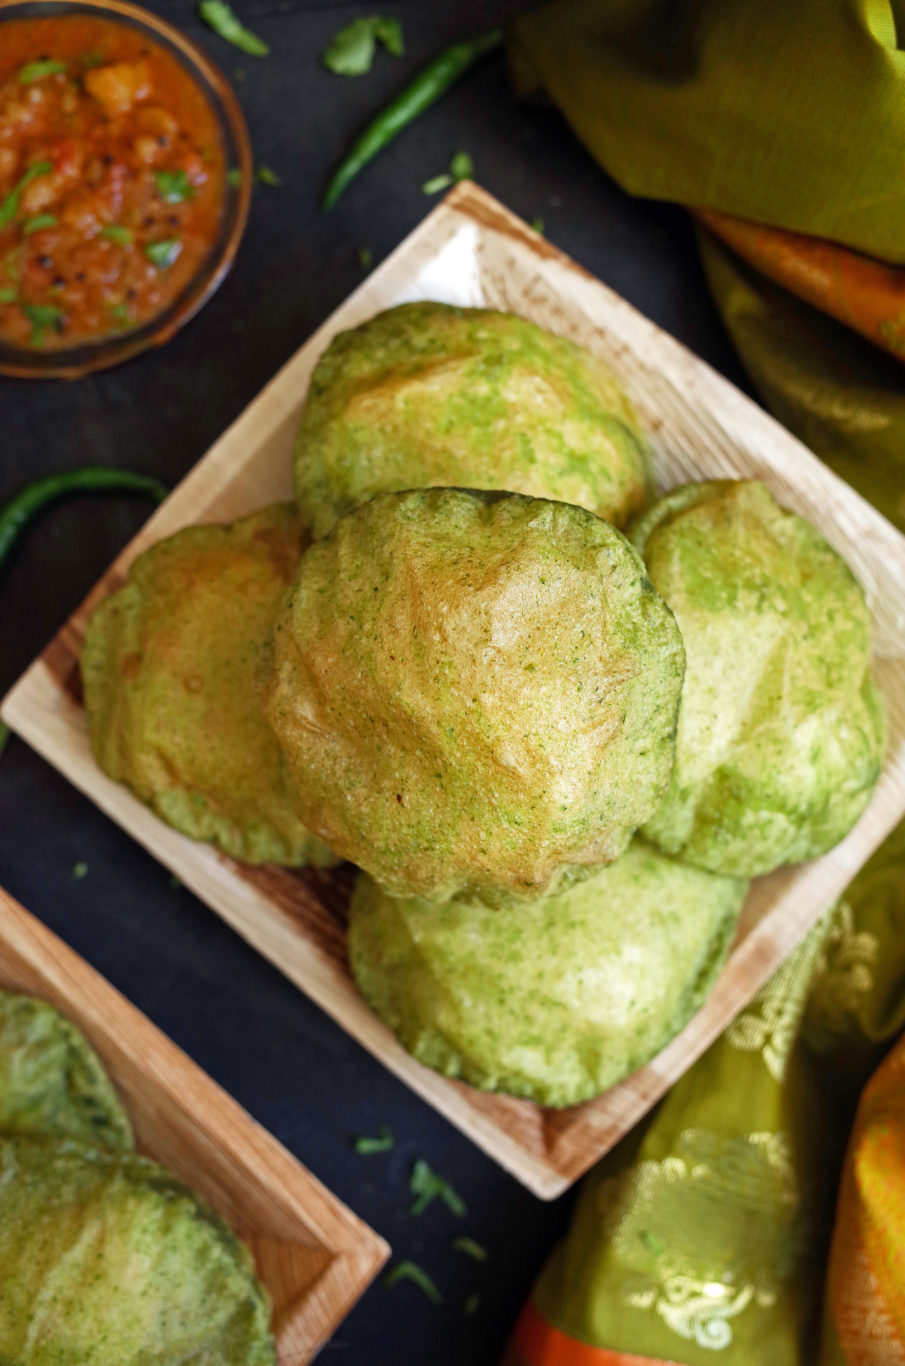 Palak Puri - Puffed Indian Breads with Spinach Dough